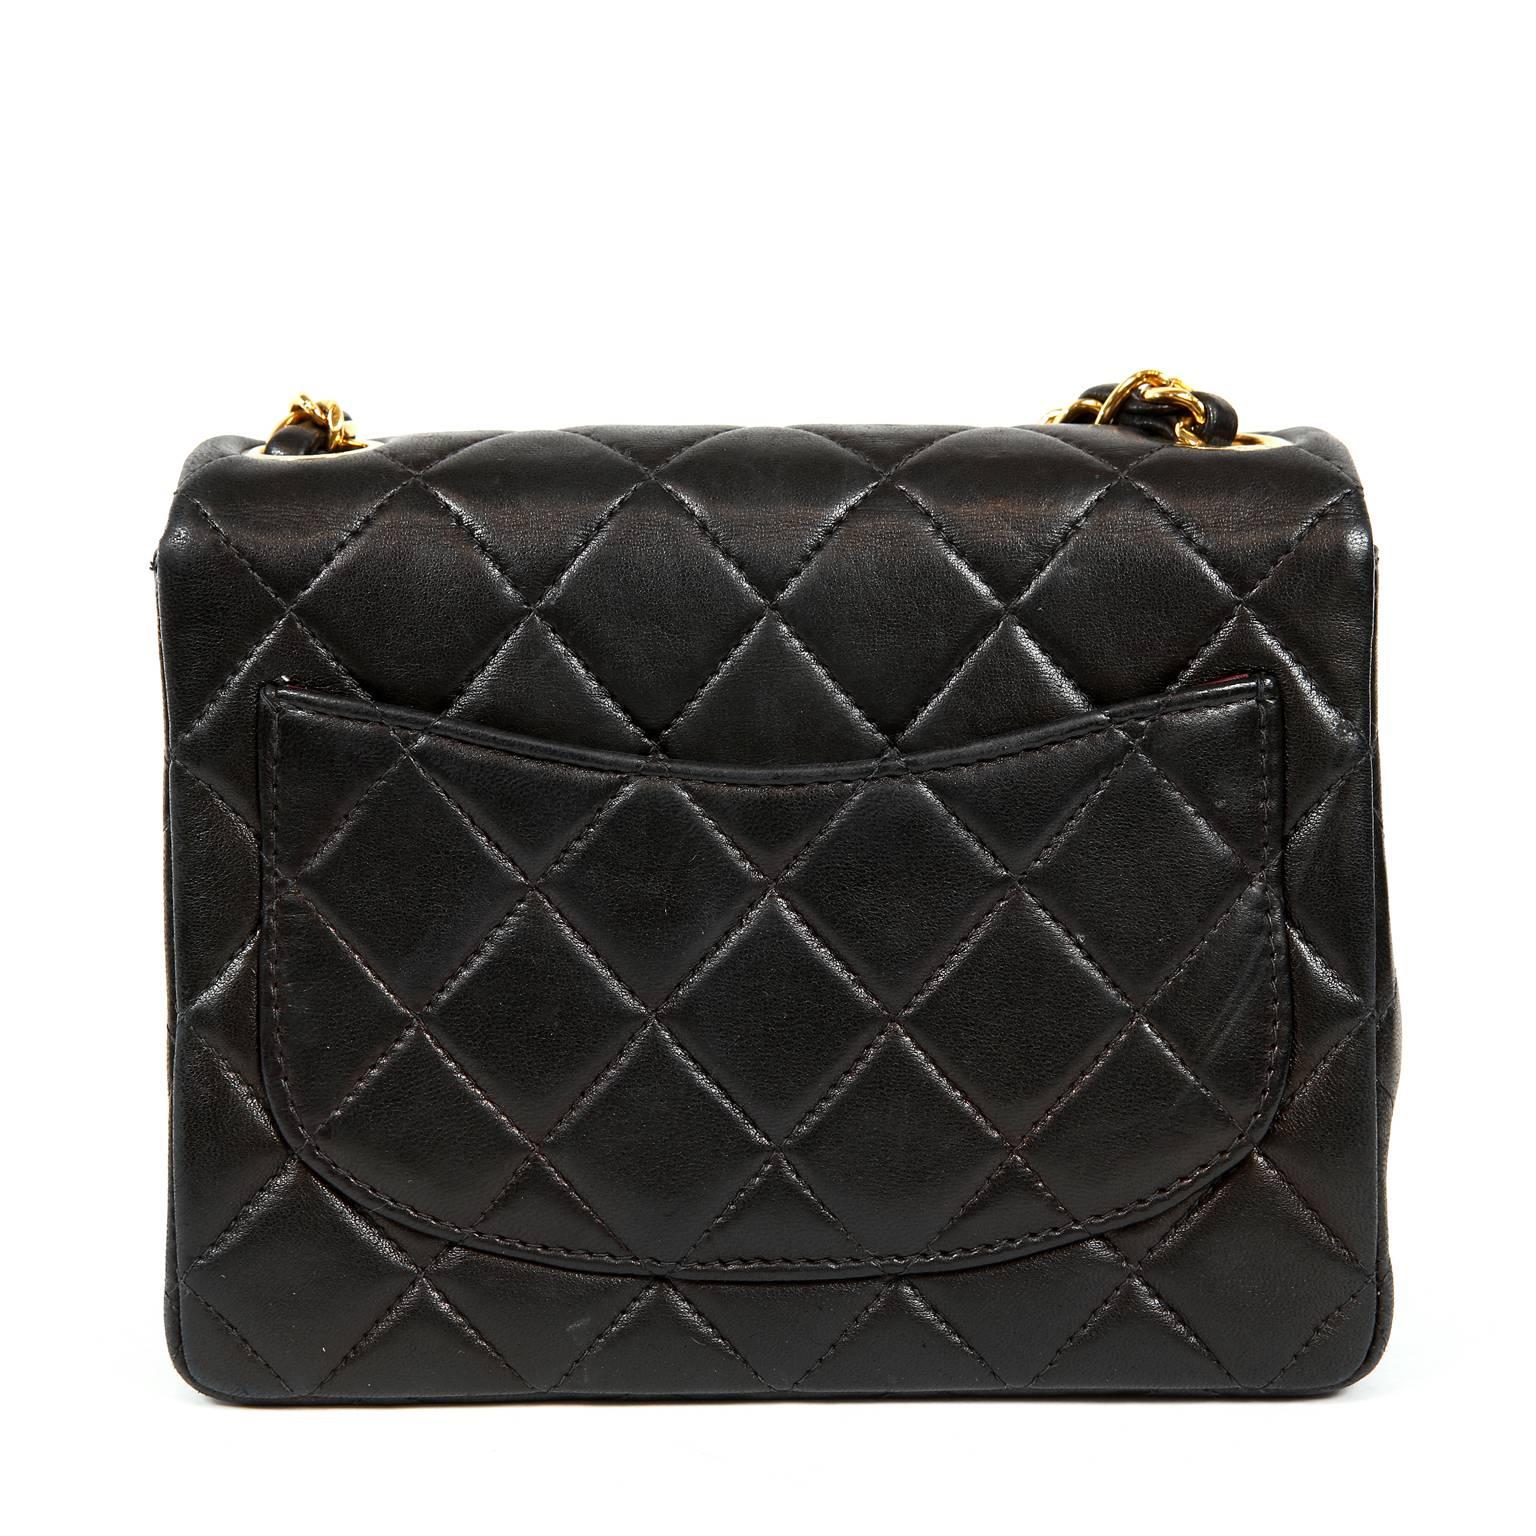 Chanel Black Lambskin Mini Classic Flap Bag- Excellent Plus
 This Vintage Chanel Black Lambskin Mini Classic is a fantastic find in beautiful condition.  From the late 1990’s, the Mini Classic has never been more popular thanks to its classic design